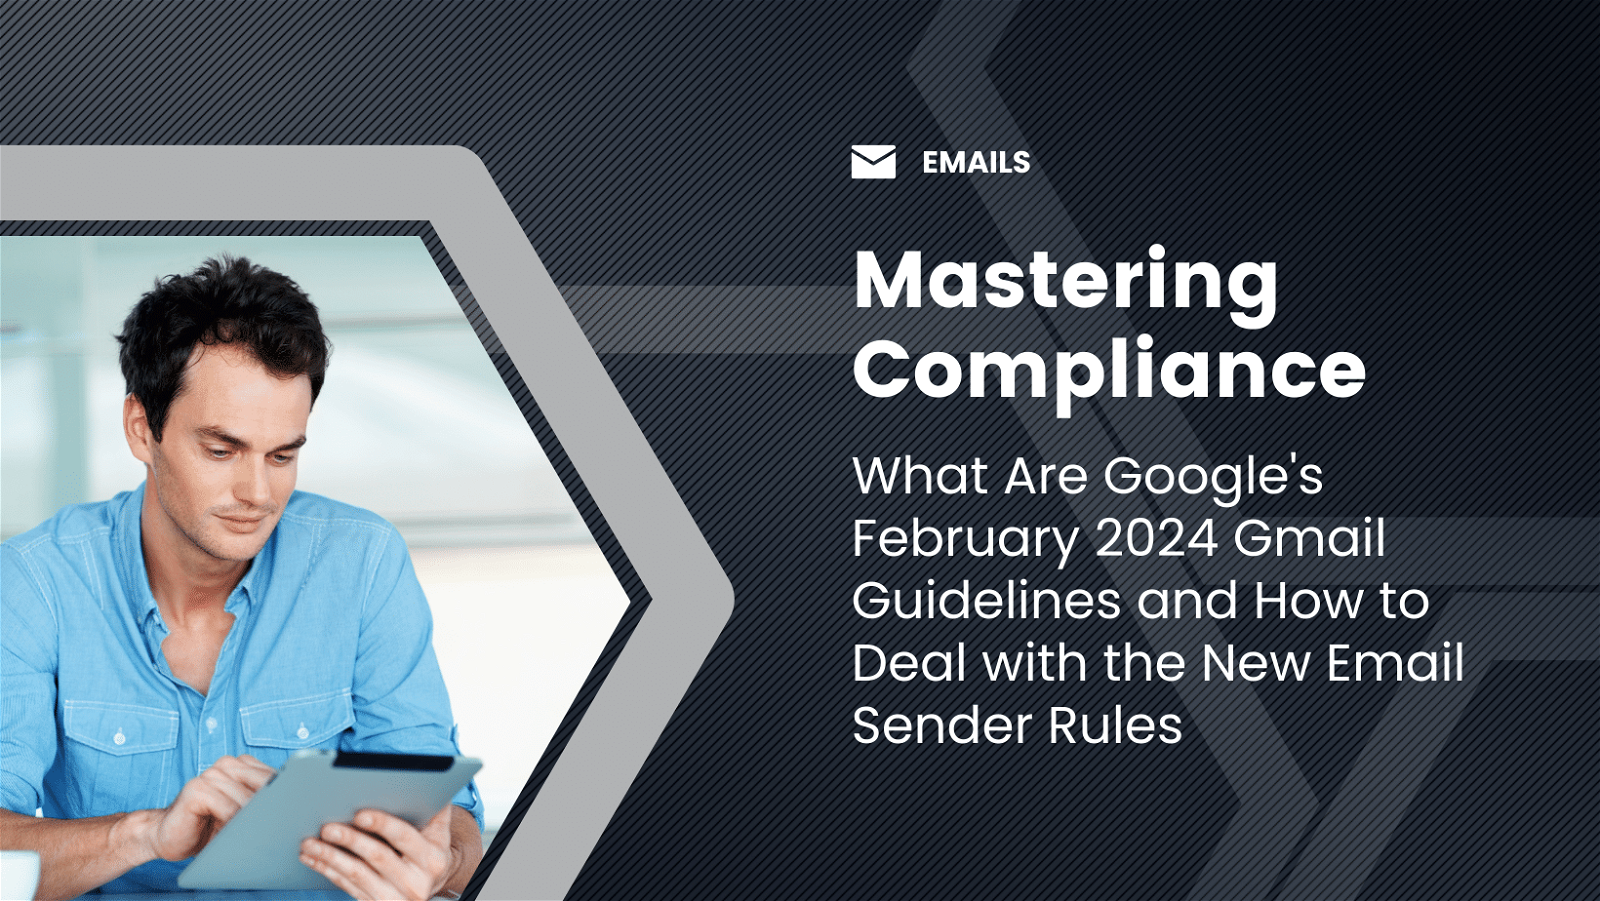 Mastering compliance with Google's February 2024 Gmail Guidelines to deal with the new sender rules.